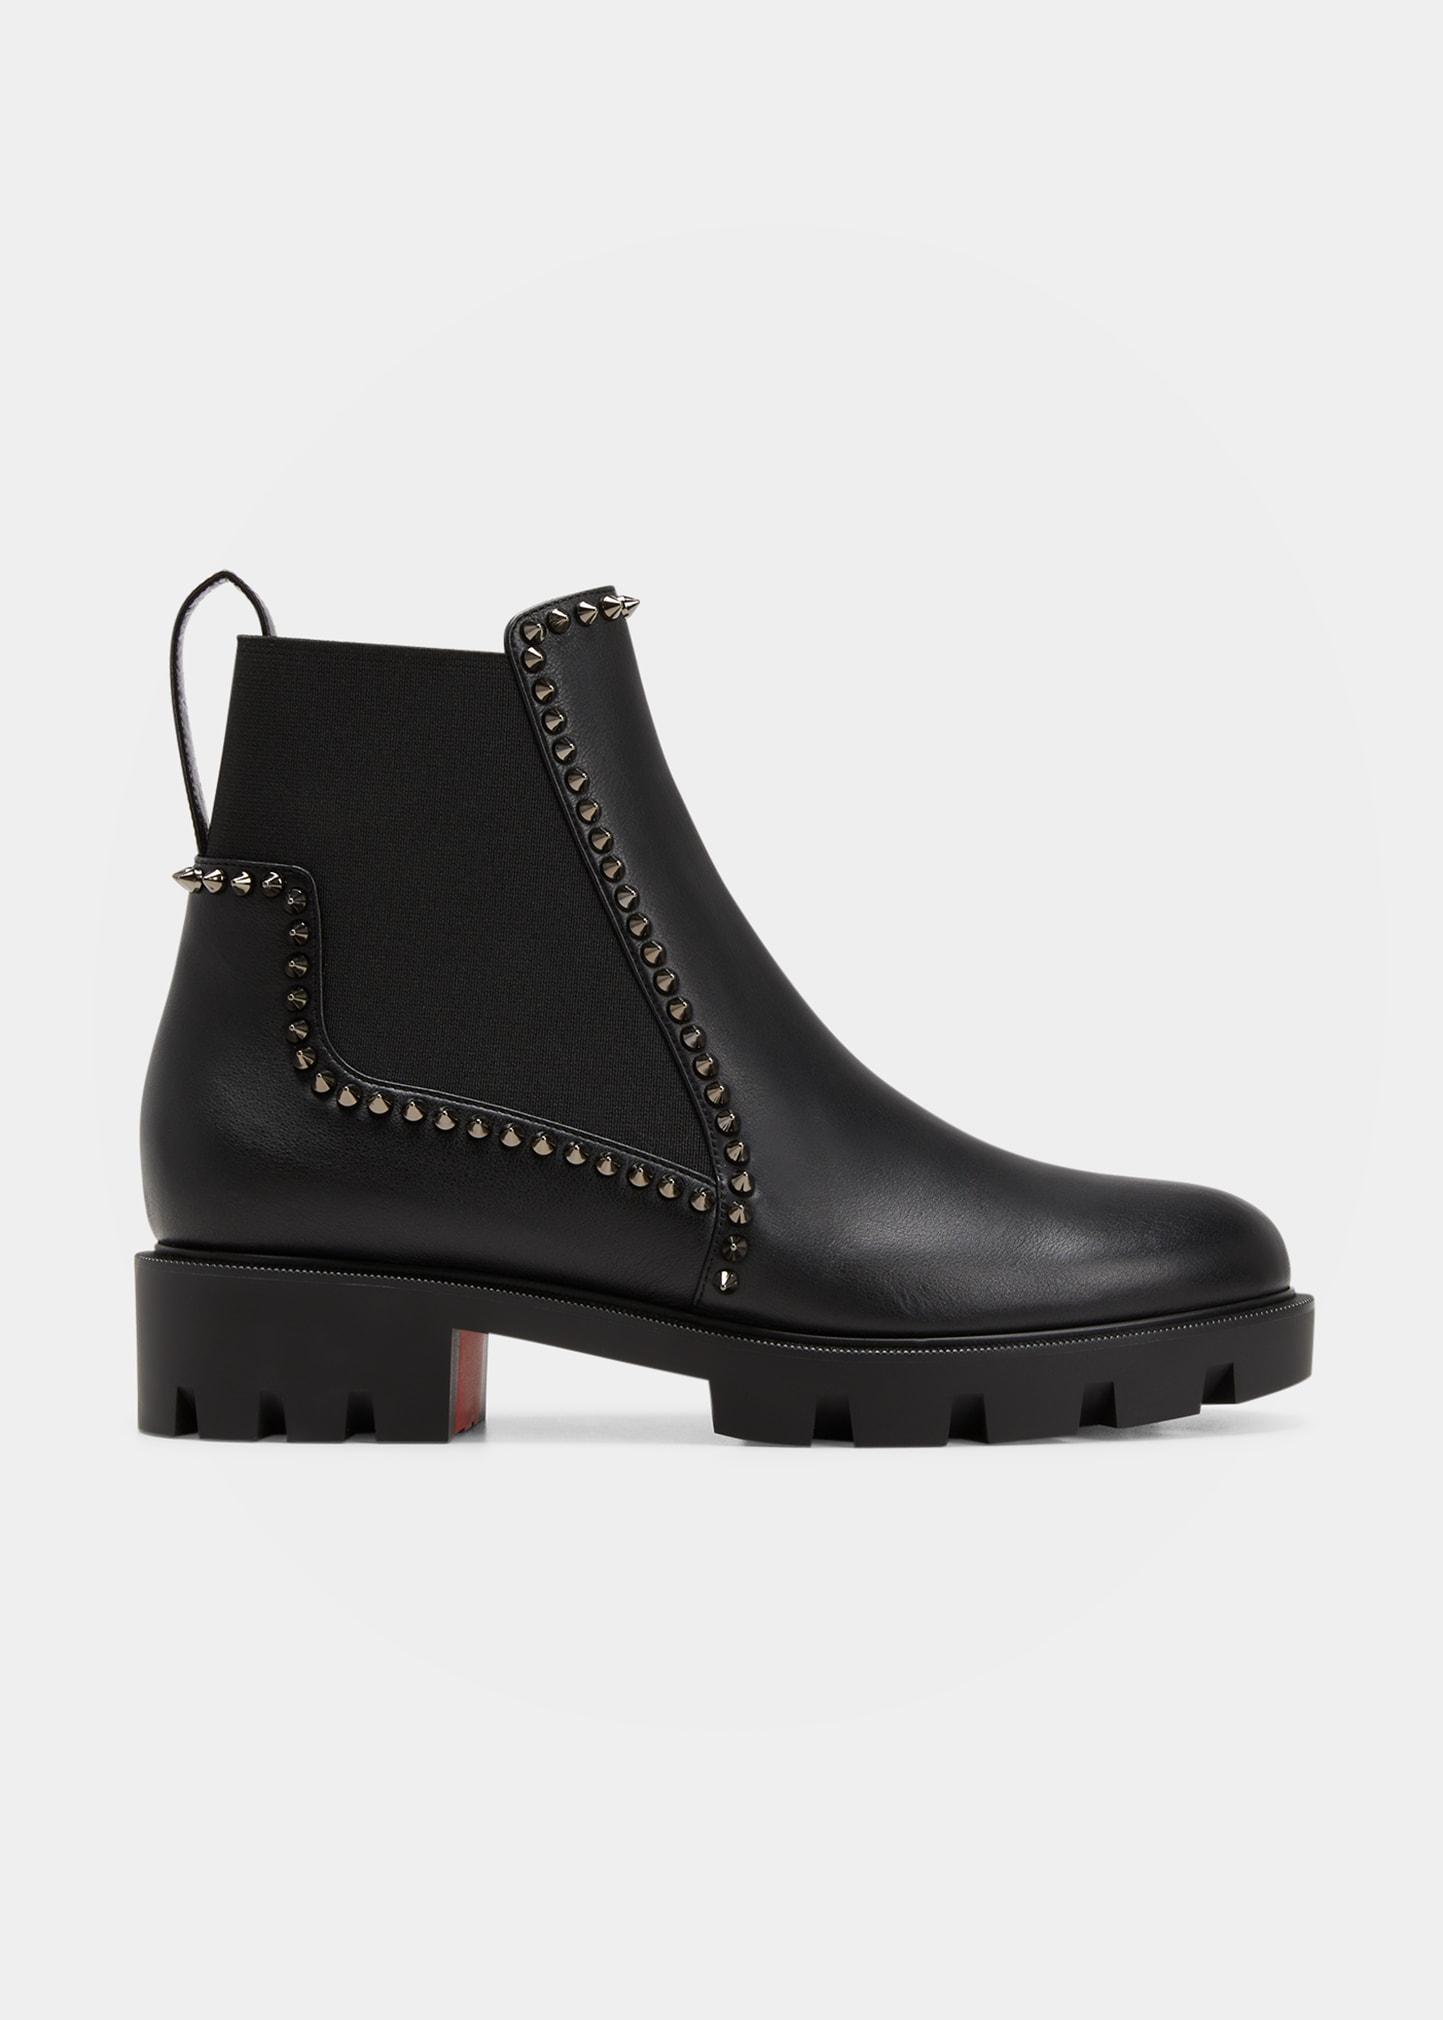 Christian Louboutin Out Lina Spike Red Sole Booties in Black | Lyst